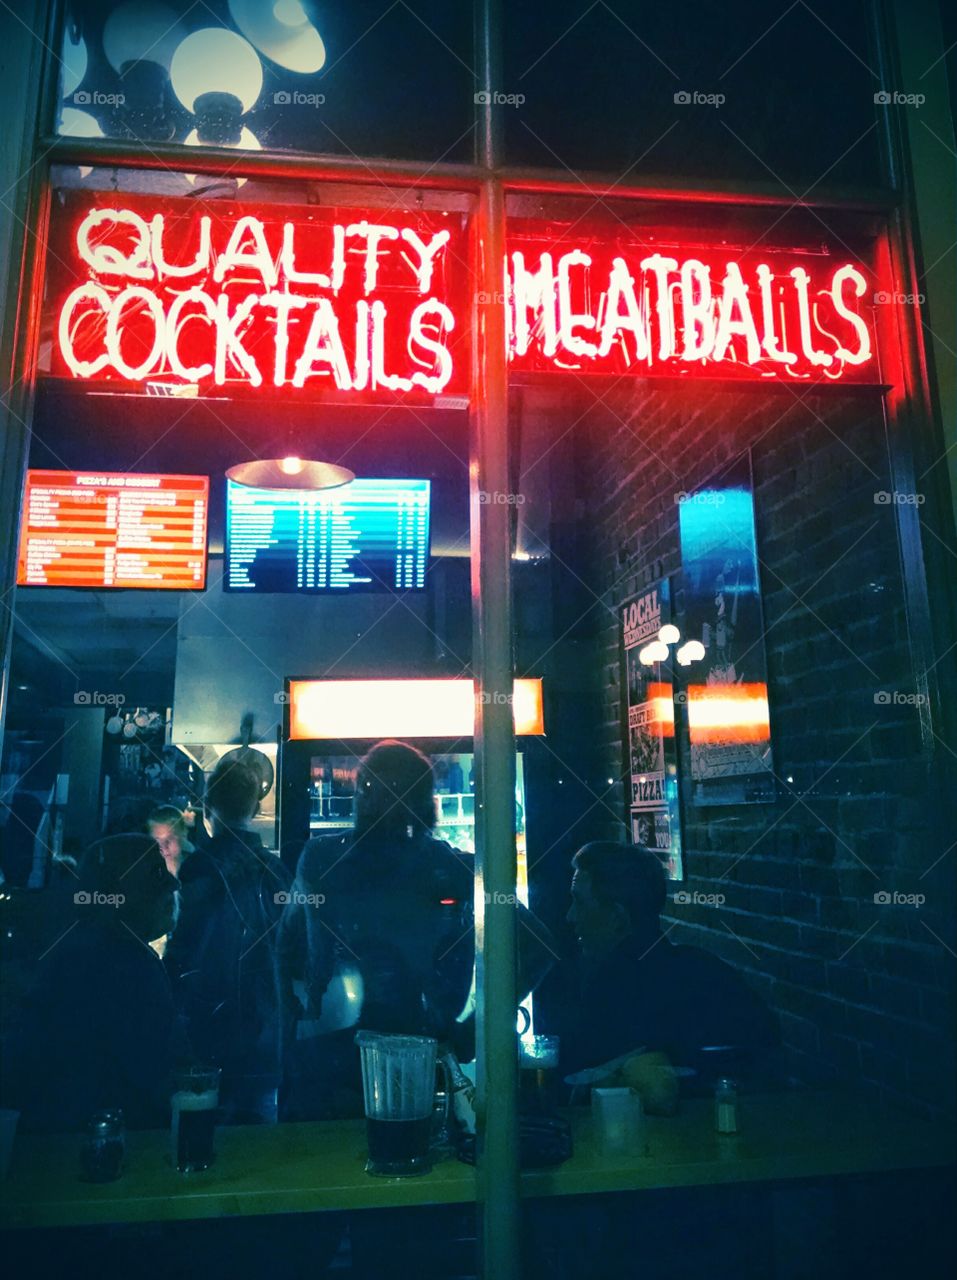 meatballs and cocktails 